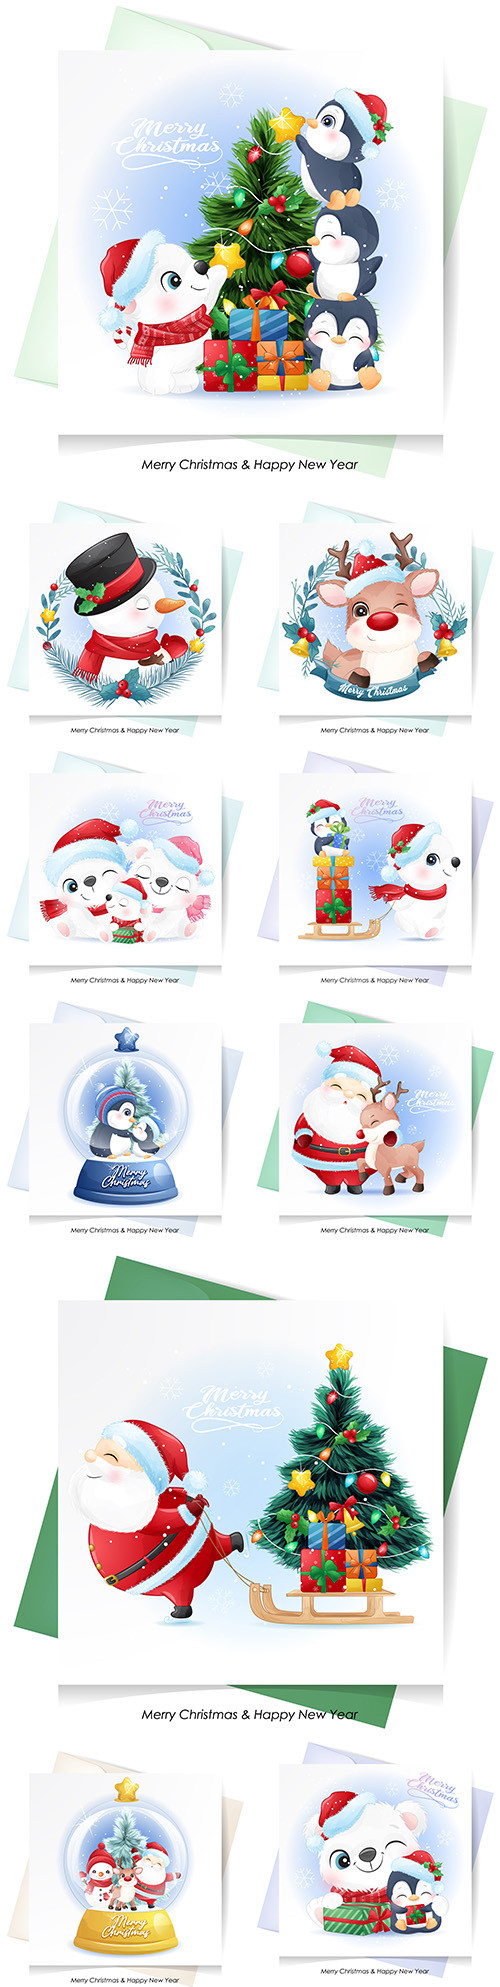 Cute Santa Claus, deer and snowman for Christmas with watercolor card
